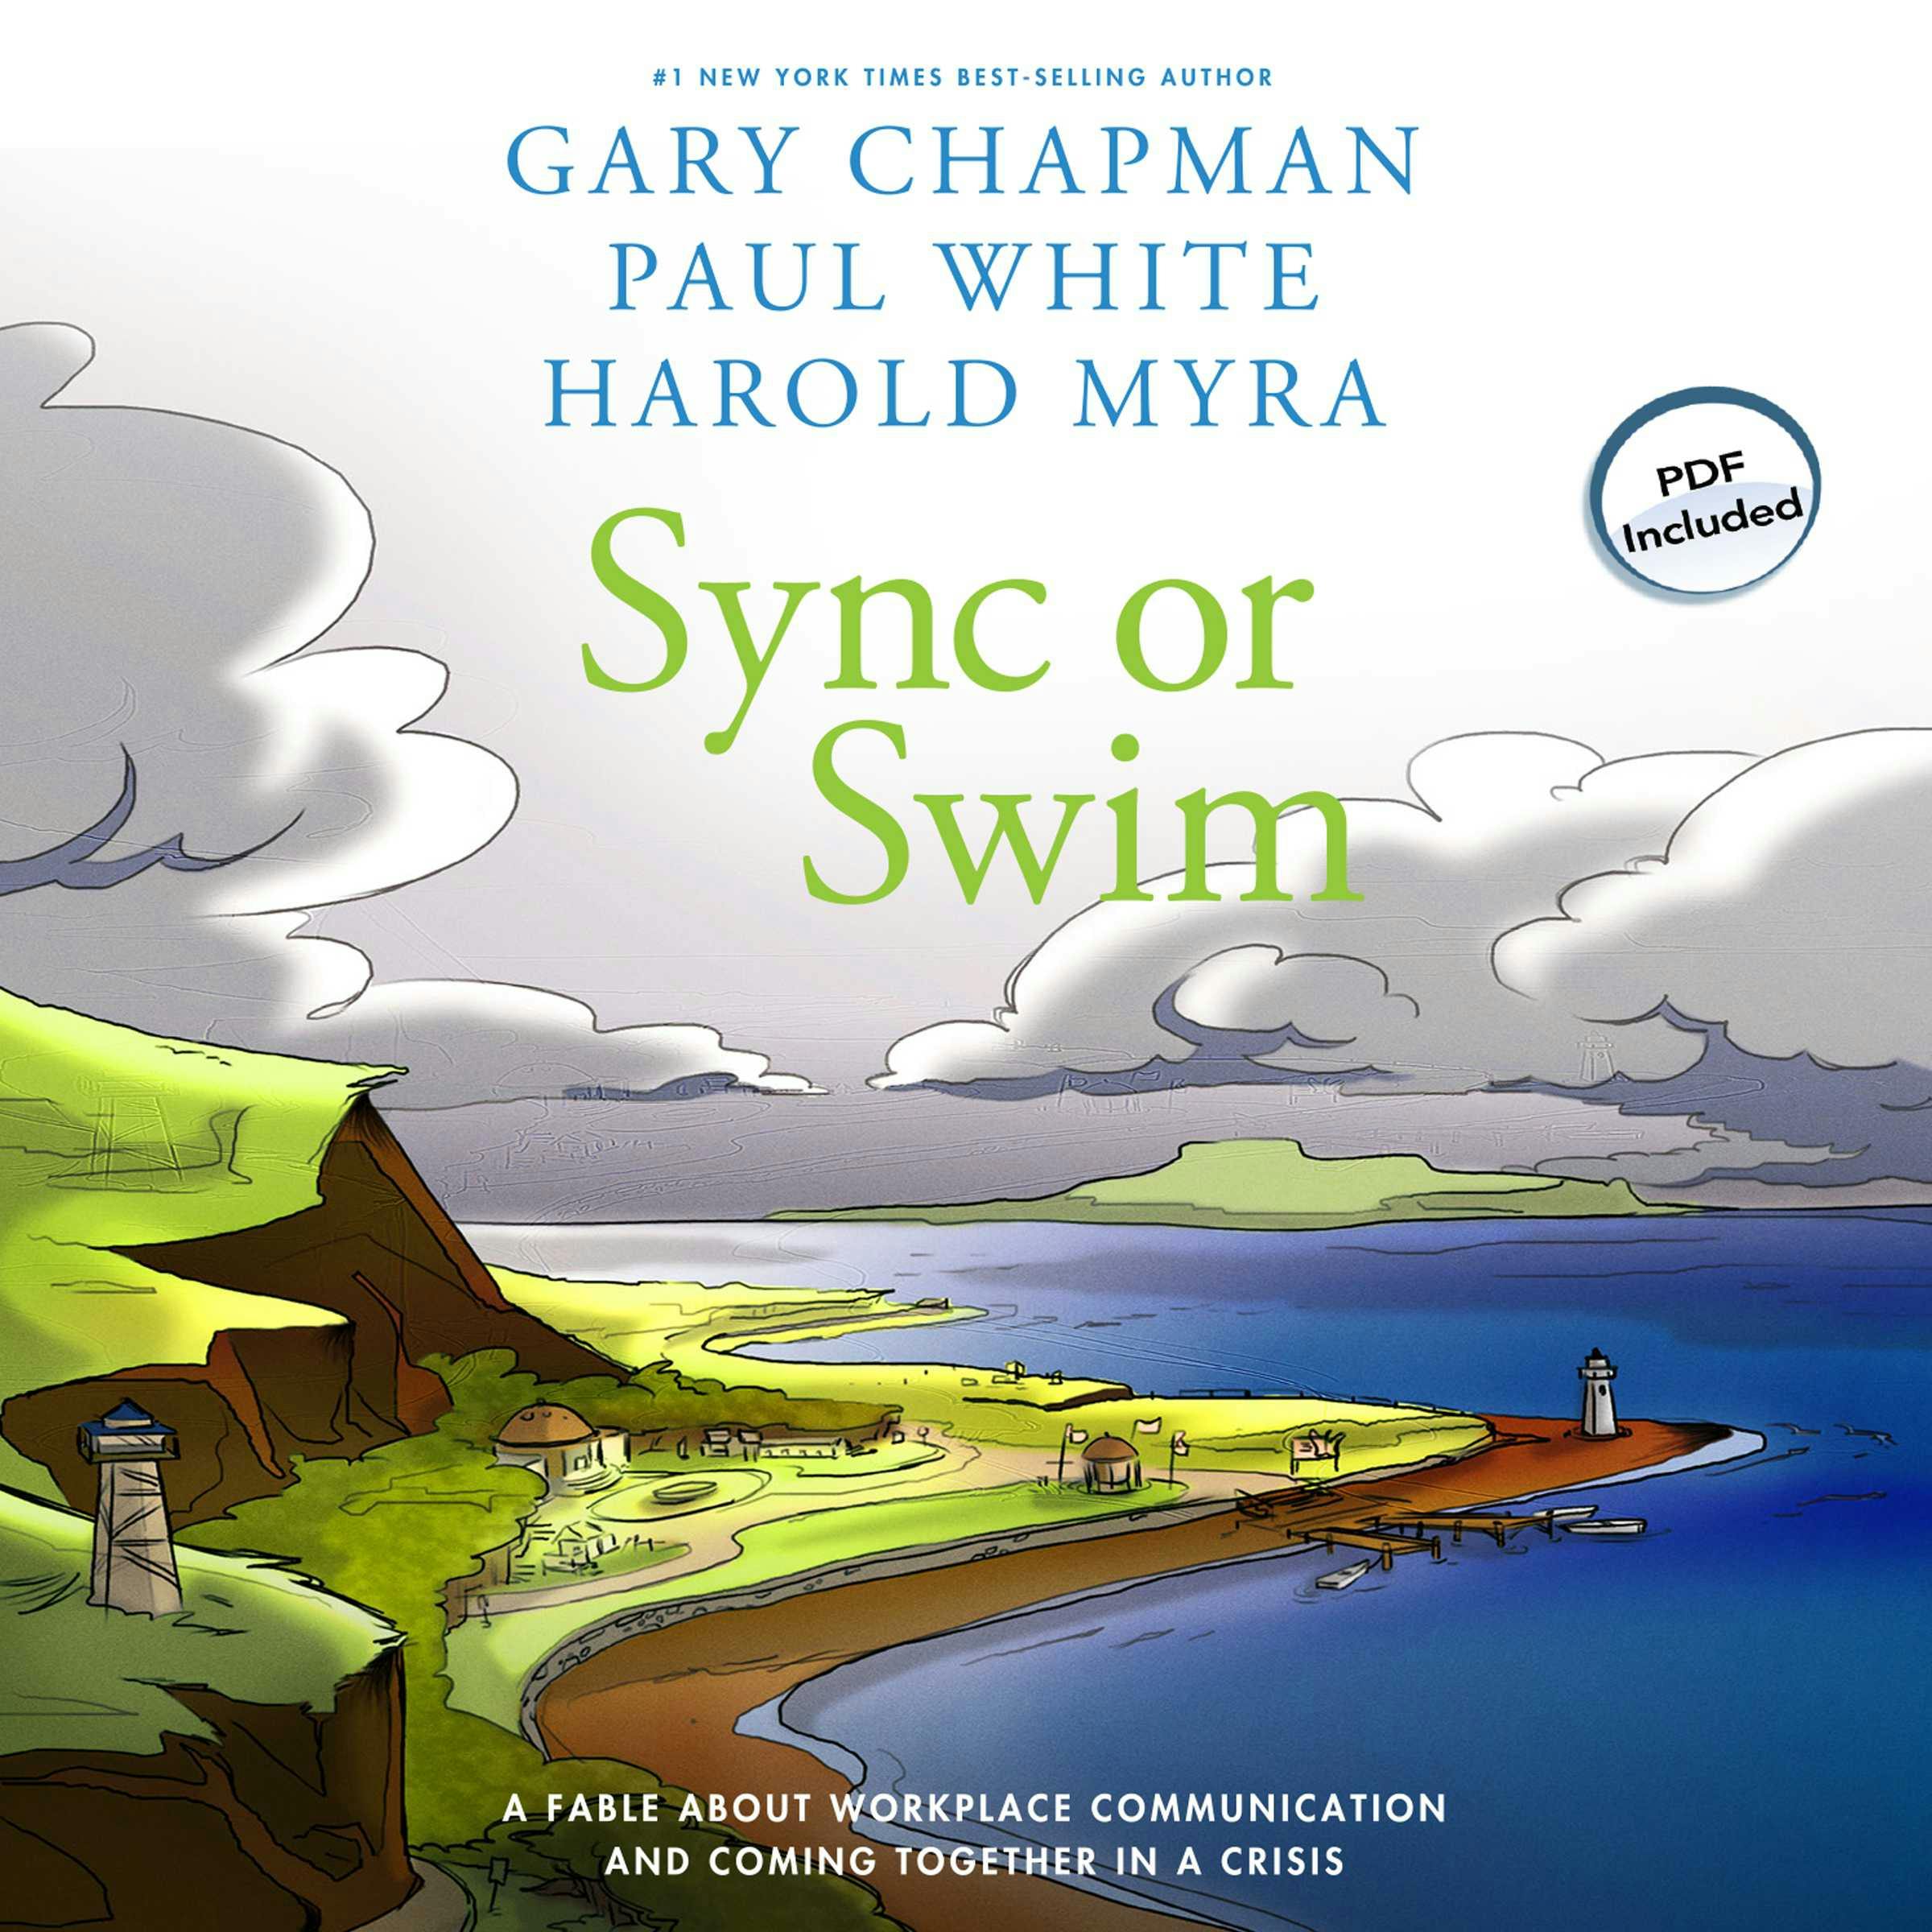 Sync or Swim: A Fable About Workplace Communication and Coming Together in a Crisis - Paul White, Harold Myra, Gary Chapman